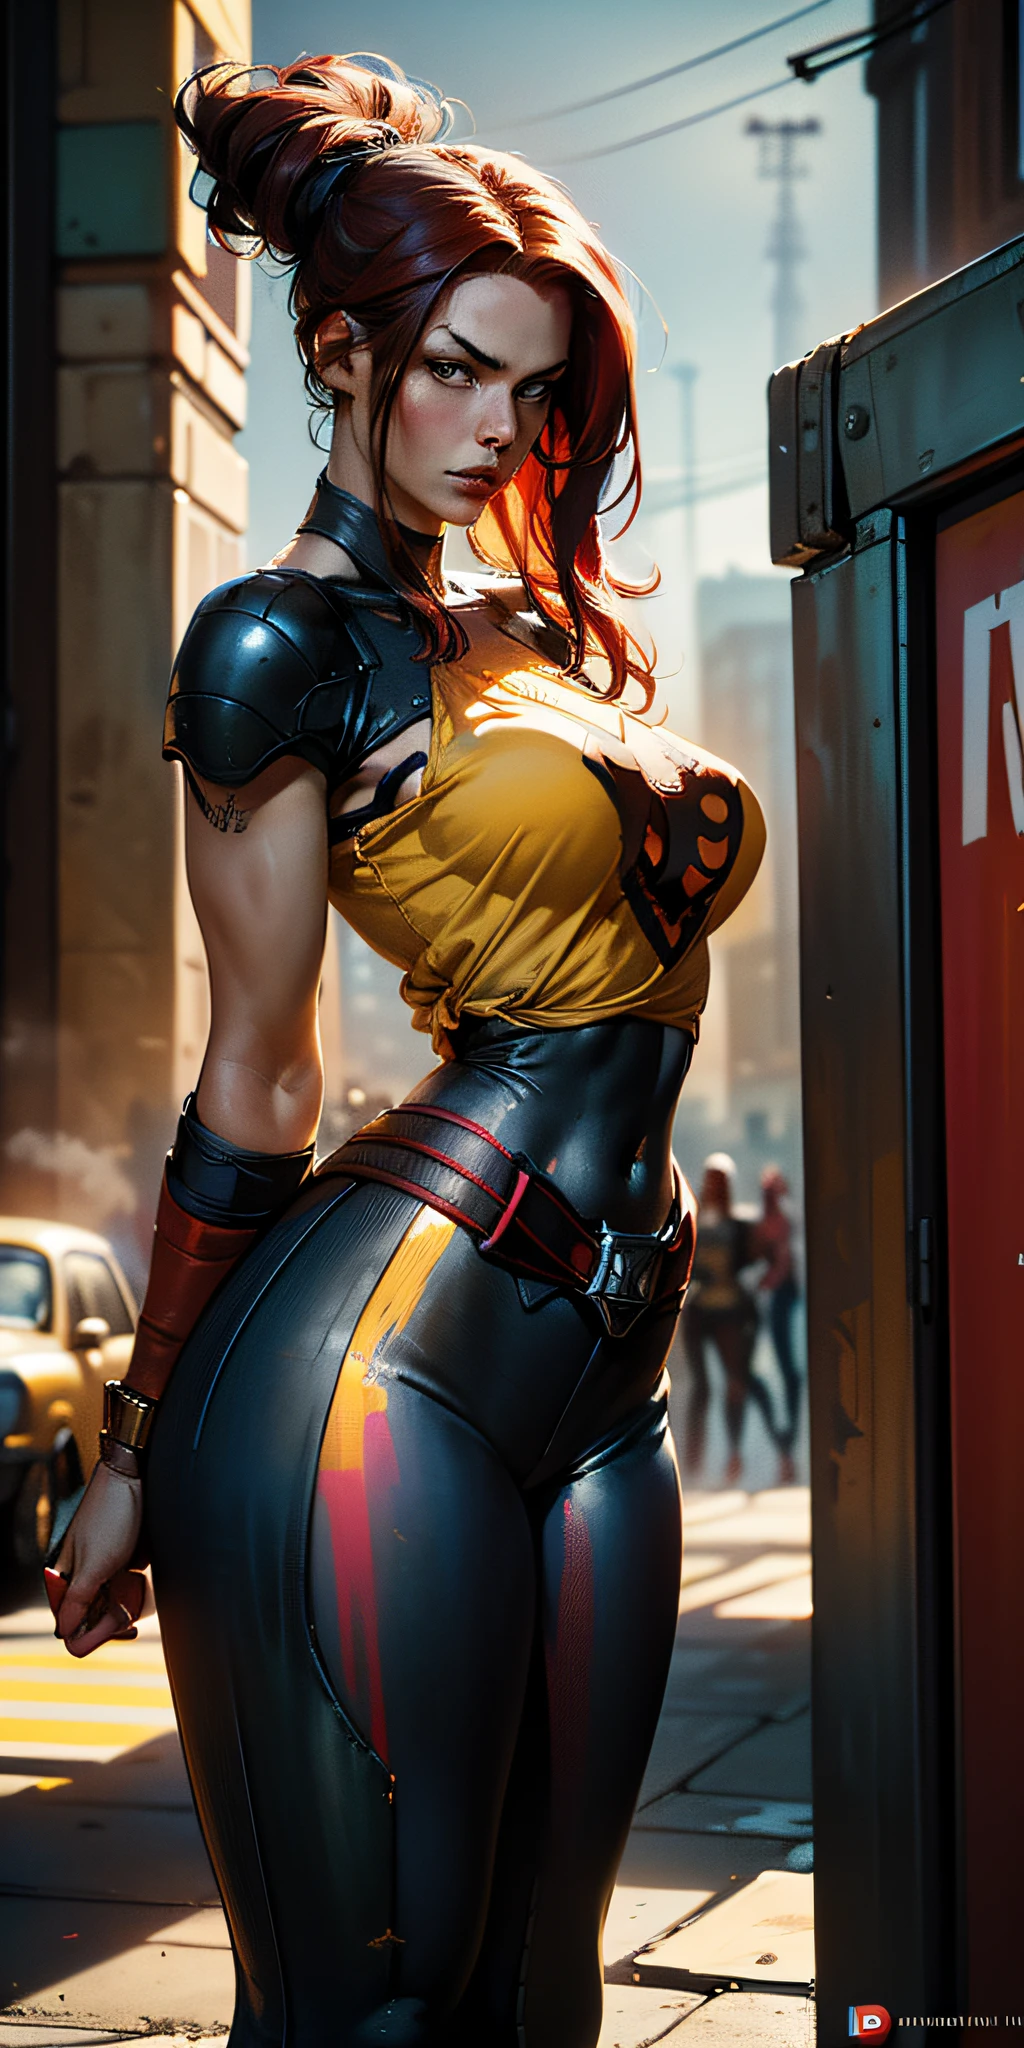 American World War II poster, Gil Elvgren style ((detailed skin)) (((A young woman with long size straight red hair up to the waist in superhero pose with yellow T-shirt and blue jeans))) ((detailed outfit entirely red with gold)) (cars in the background of the image) (((robotic left arm)) (((cyberpunk arm)))adobe lightroom, hero uniform, 1 girl,  Solo, good body, side light, poster art style. 1980s, 1950s, 1960s, 1940s, basic color scheme, very colorful poster, colorful art, third rule, inspiring, woman, 1 25-year-old girl, hair blowing in the wind, looking at the viewer, blurred background, curvy body, green eyes